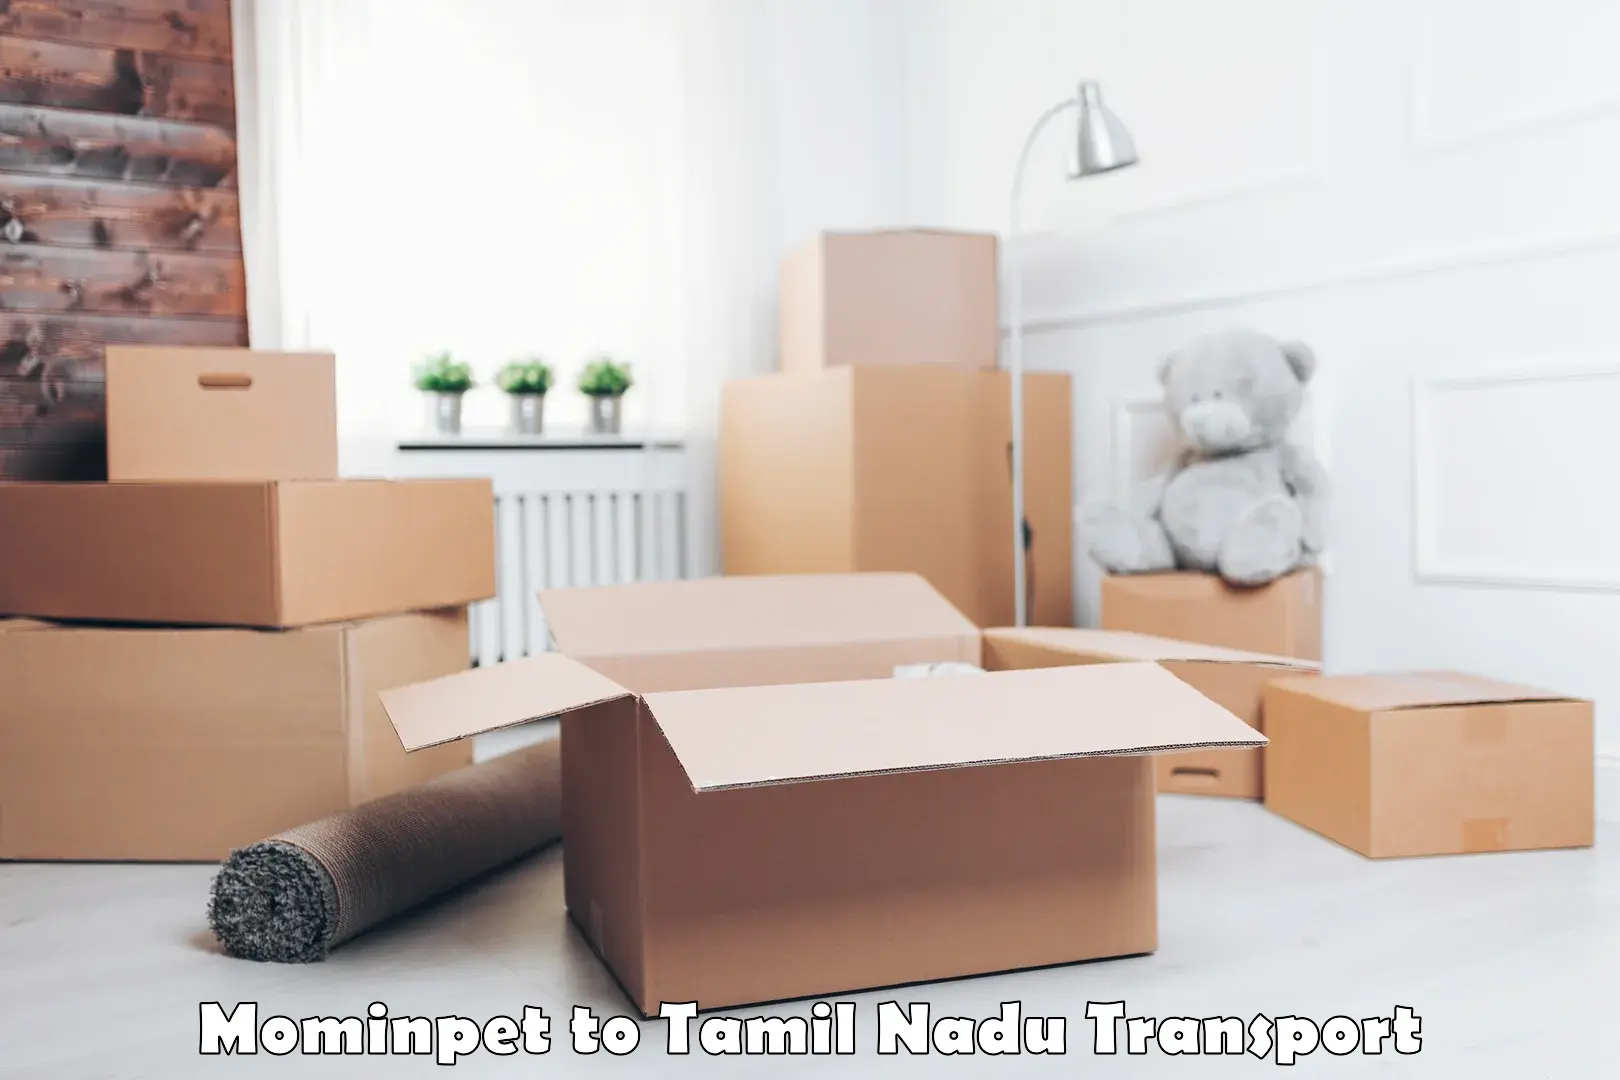 Two wheeler parcel service Mominpet to Erode